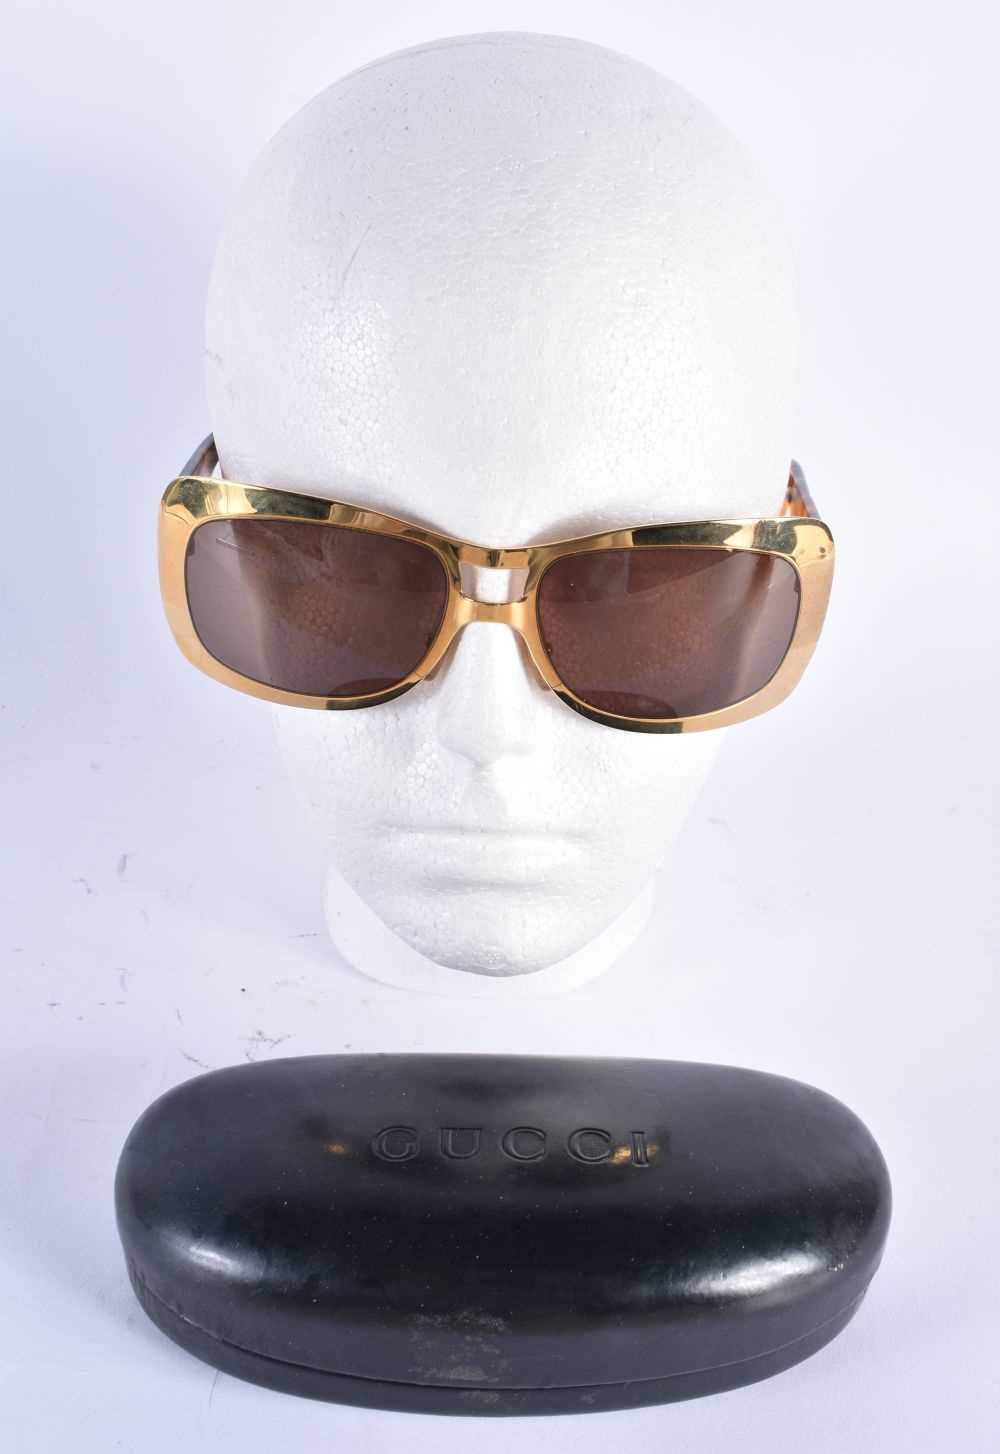 A CASED PAIR OF GUCCI SUNGLASSES. 15 cm wide.